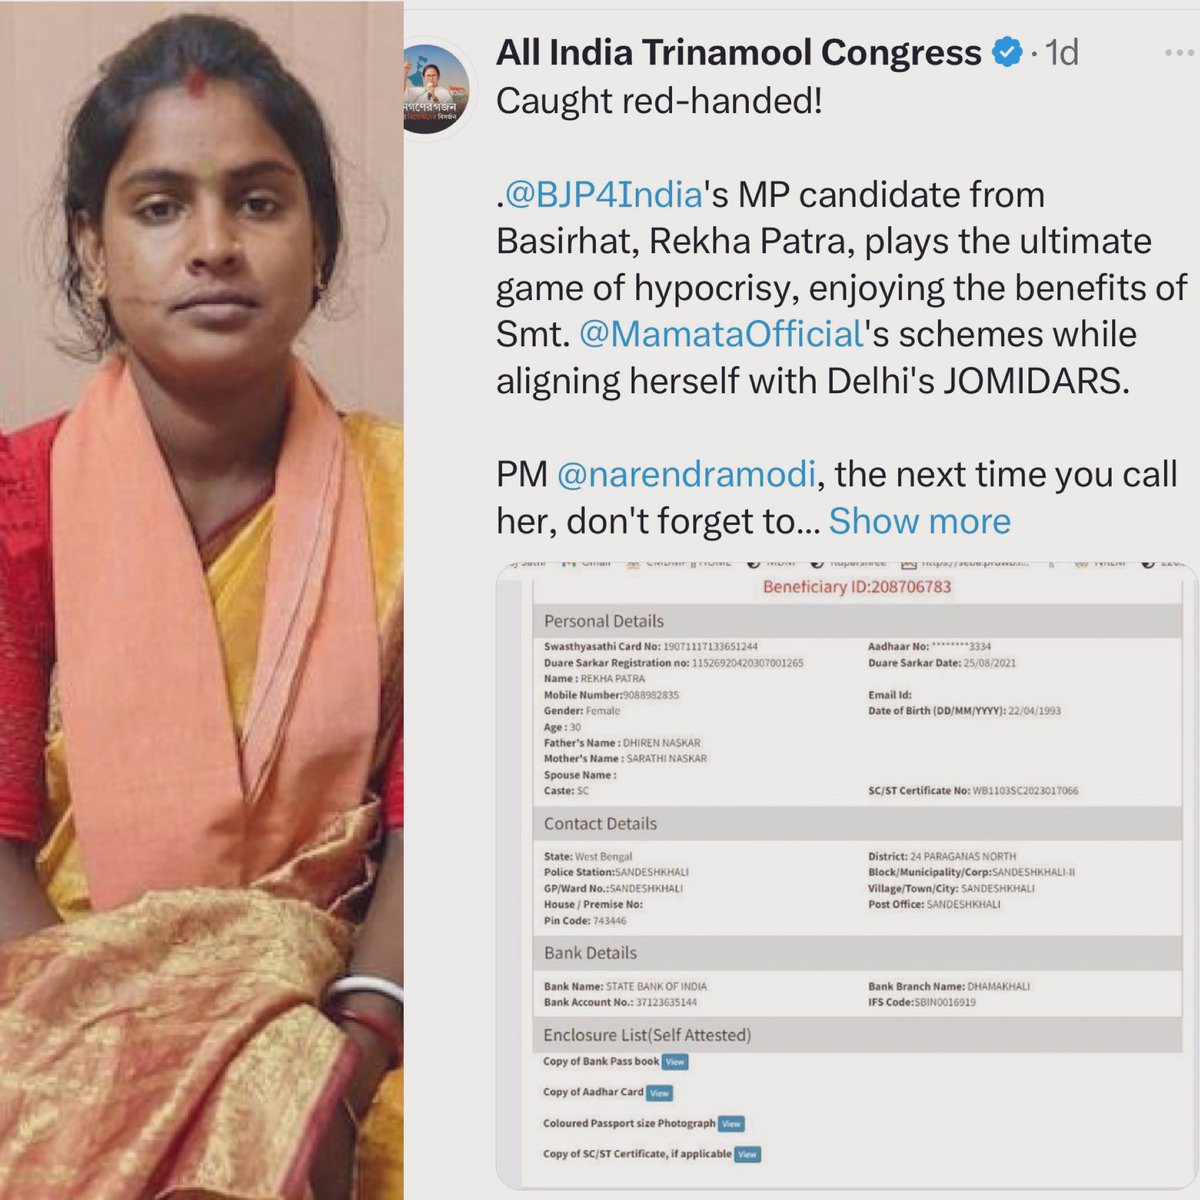 Oh the silence of the ecosystem on this! After denying alleged Sandeshkhali crimes, TMC doxxes & attacks accuser Rekha Patra because she is a BJP candidate ‘despite’ state benefits. Rival party candidate not a state citizen!? 2 min silence for Naari Shakti & fascism gyaanis.💀